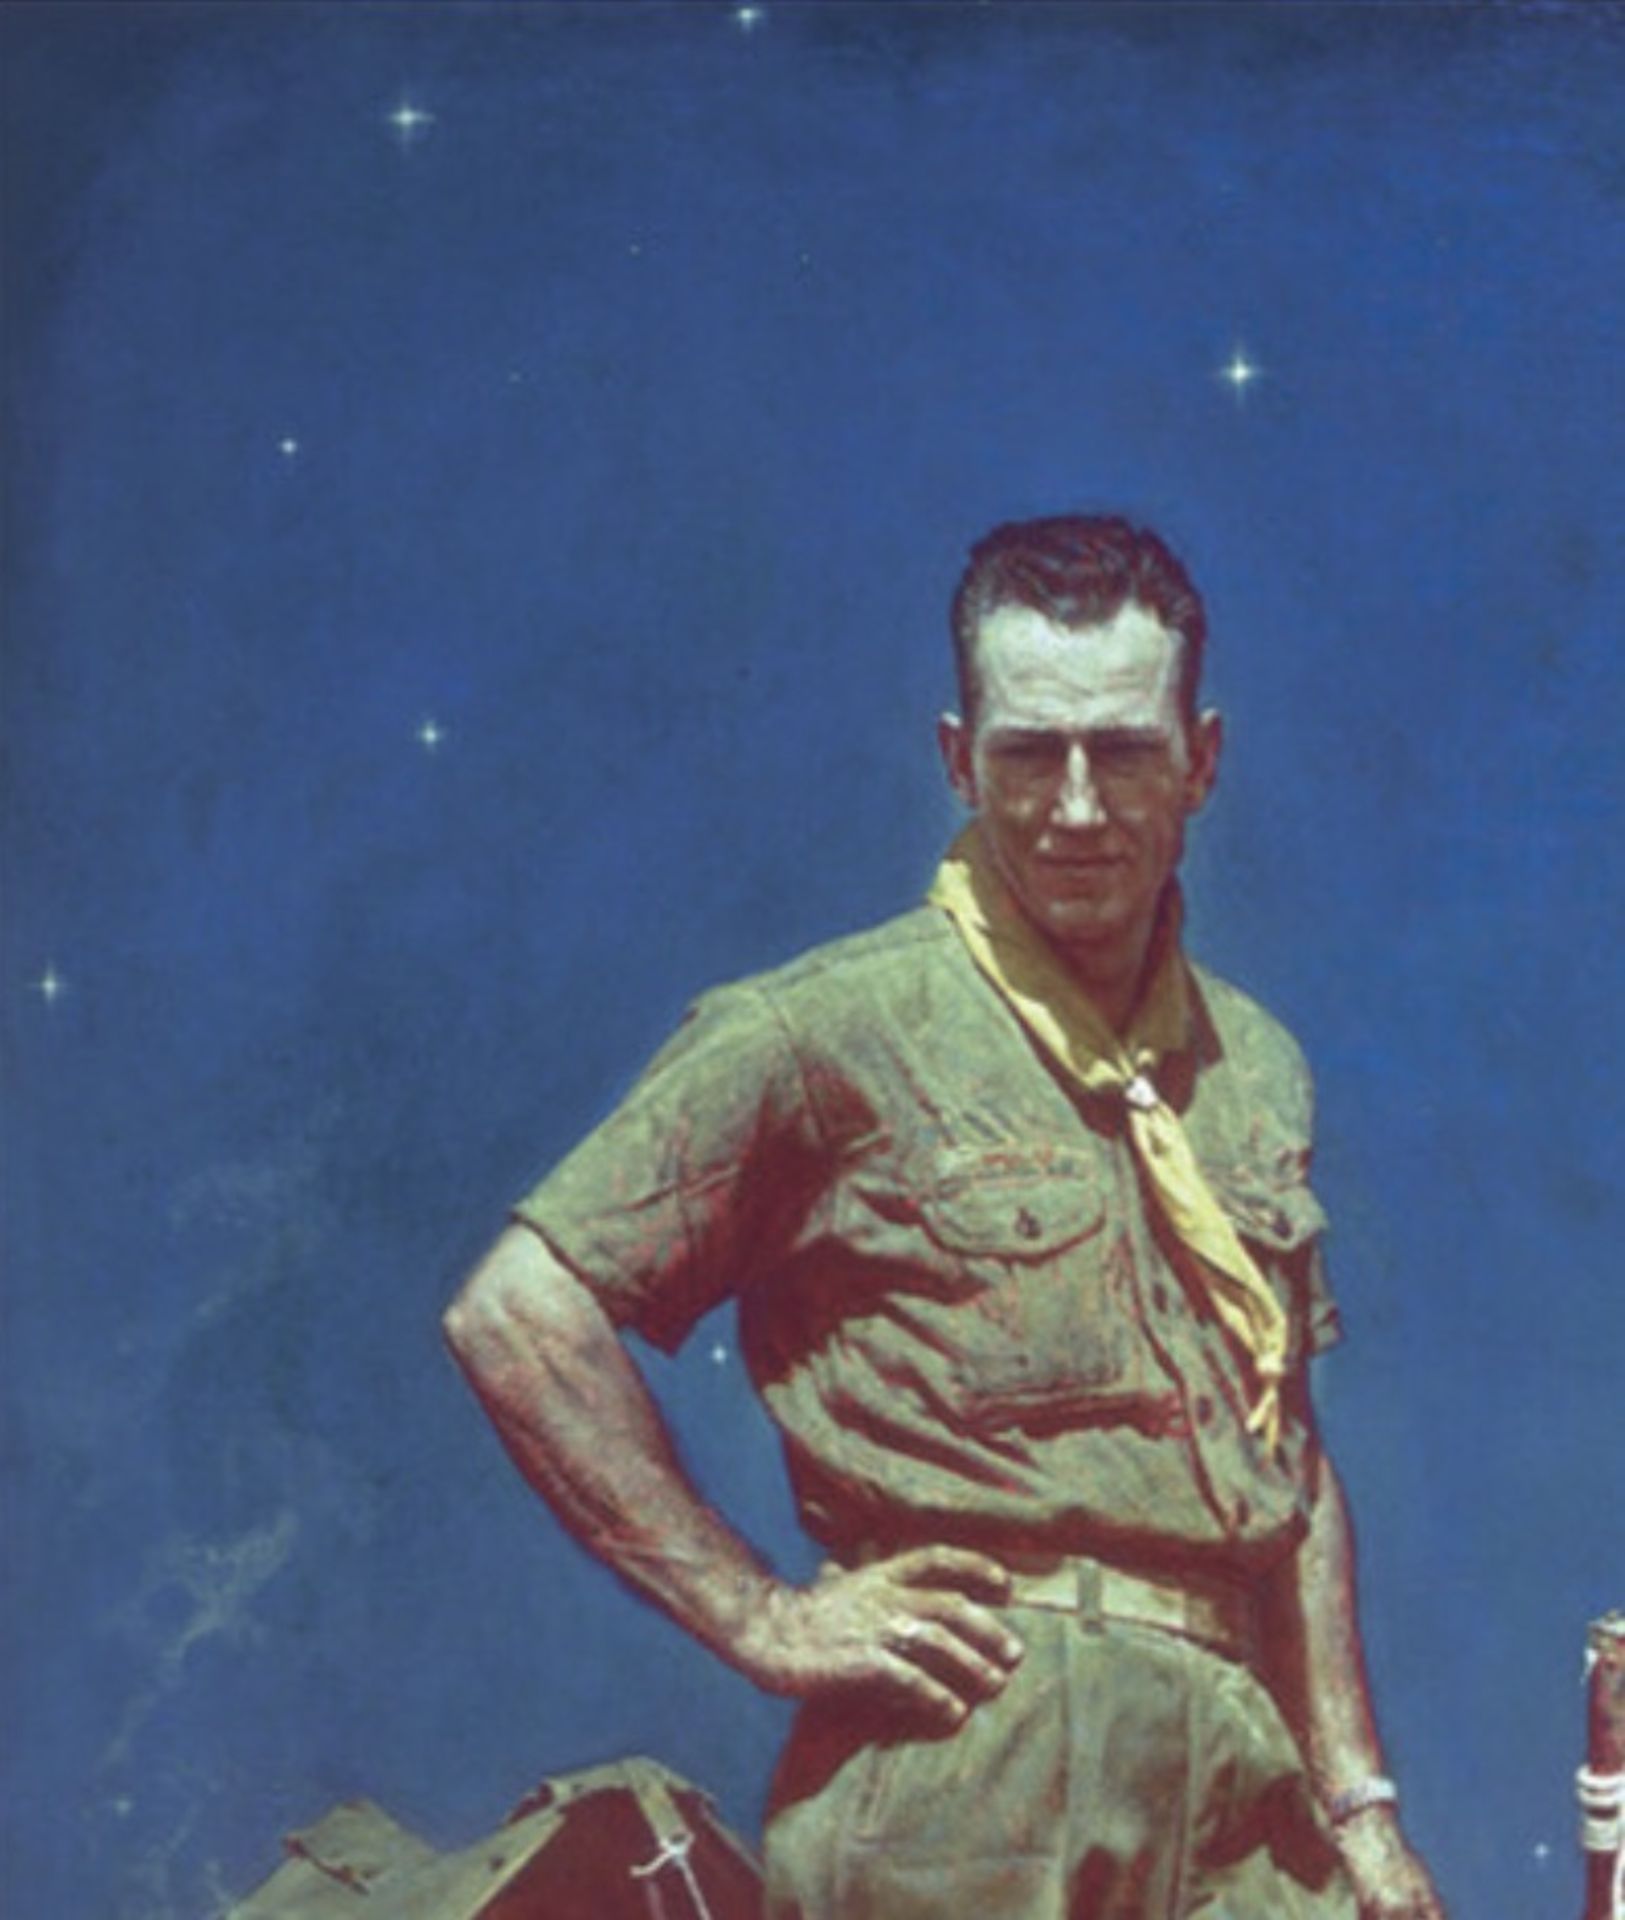 Norman Rockwell "The Scoutmaster, 1956" Offset Lithograph - Image 2 of 5